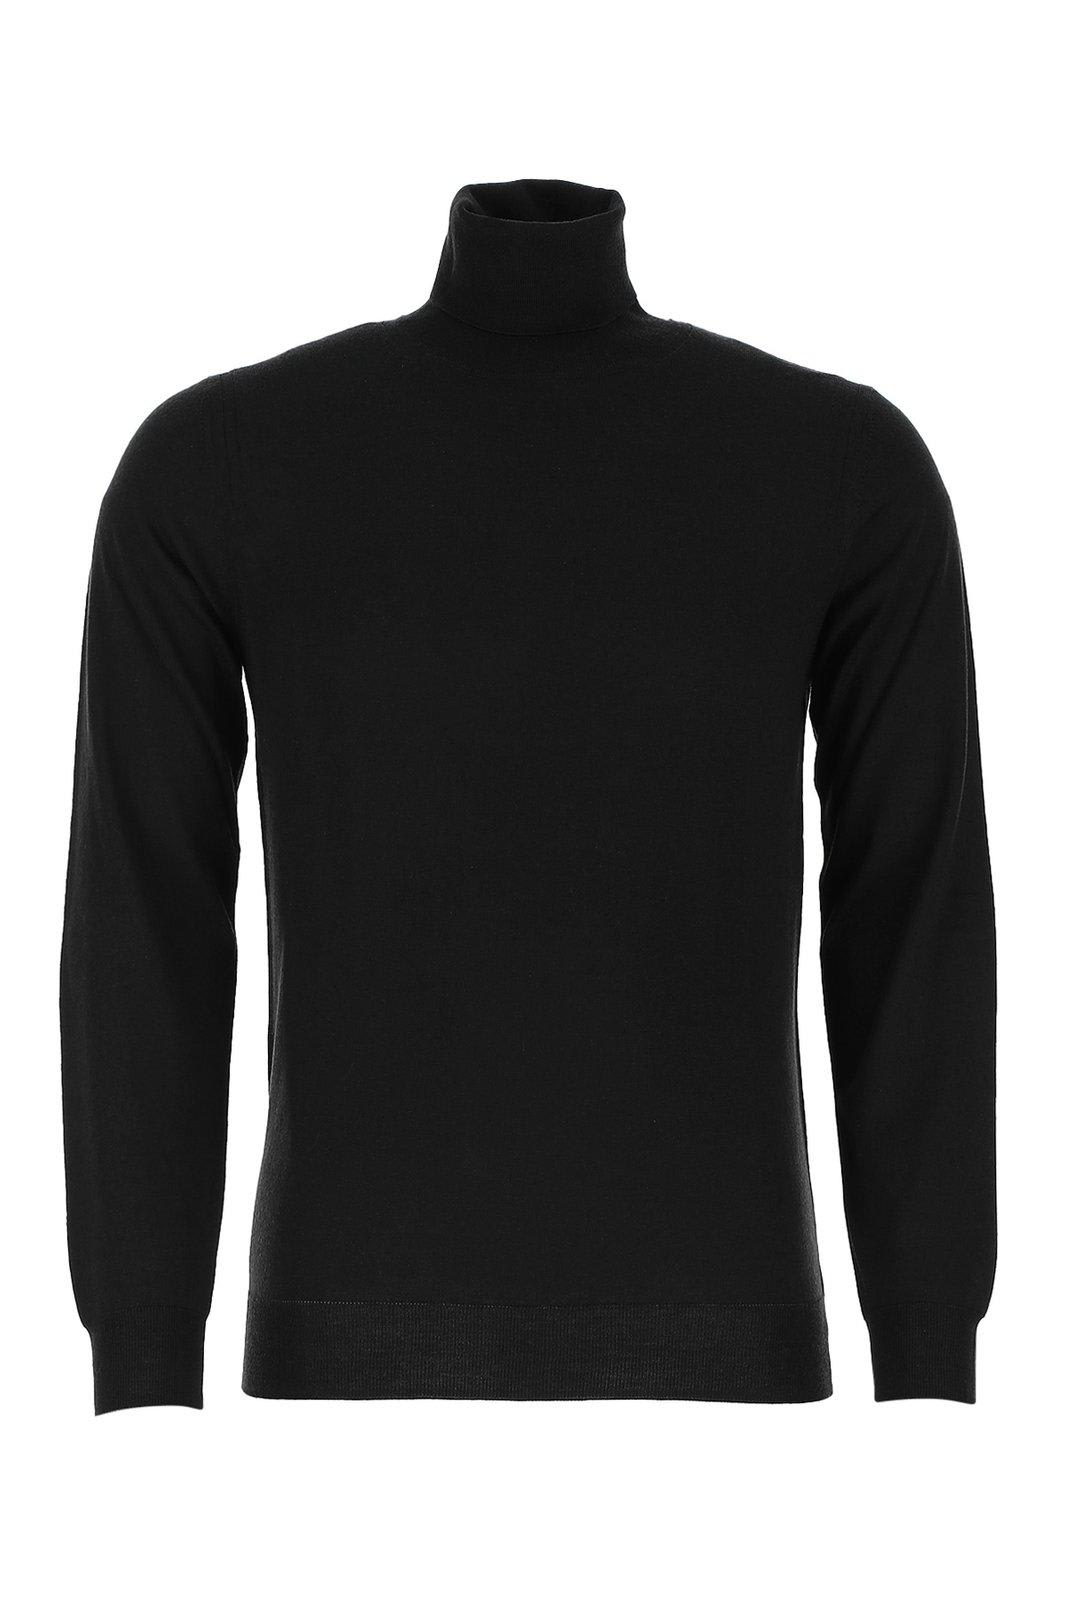 Paolo Pecora Roll Neck Knitted Jumper